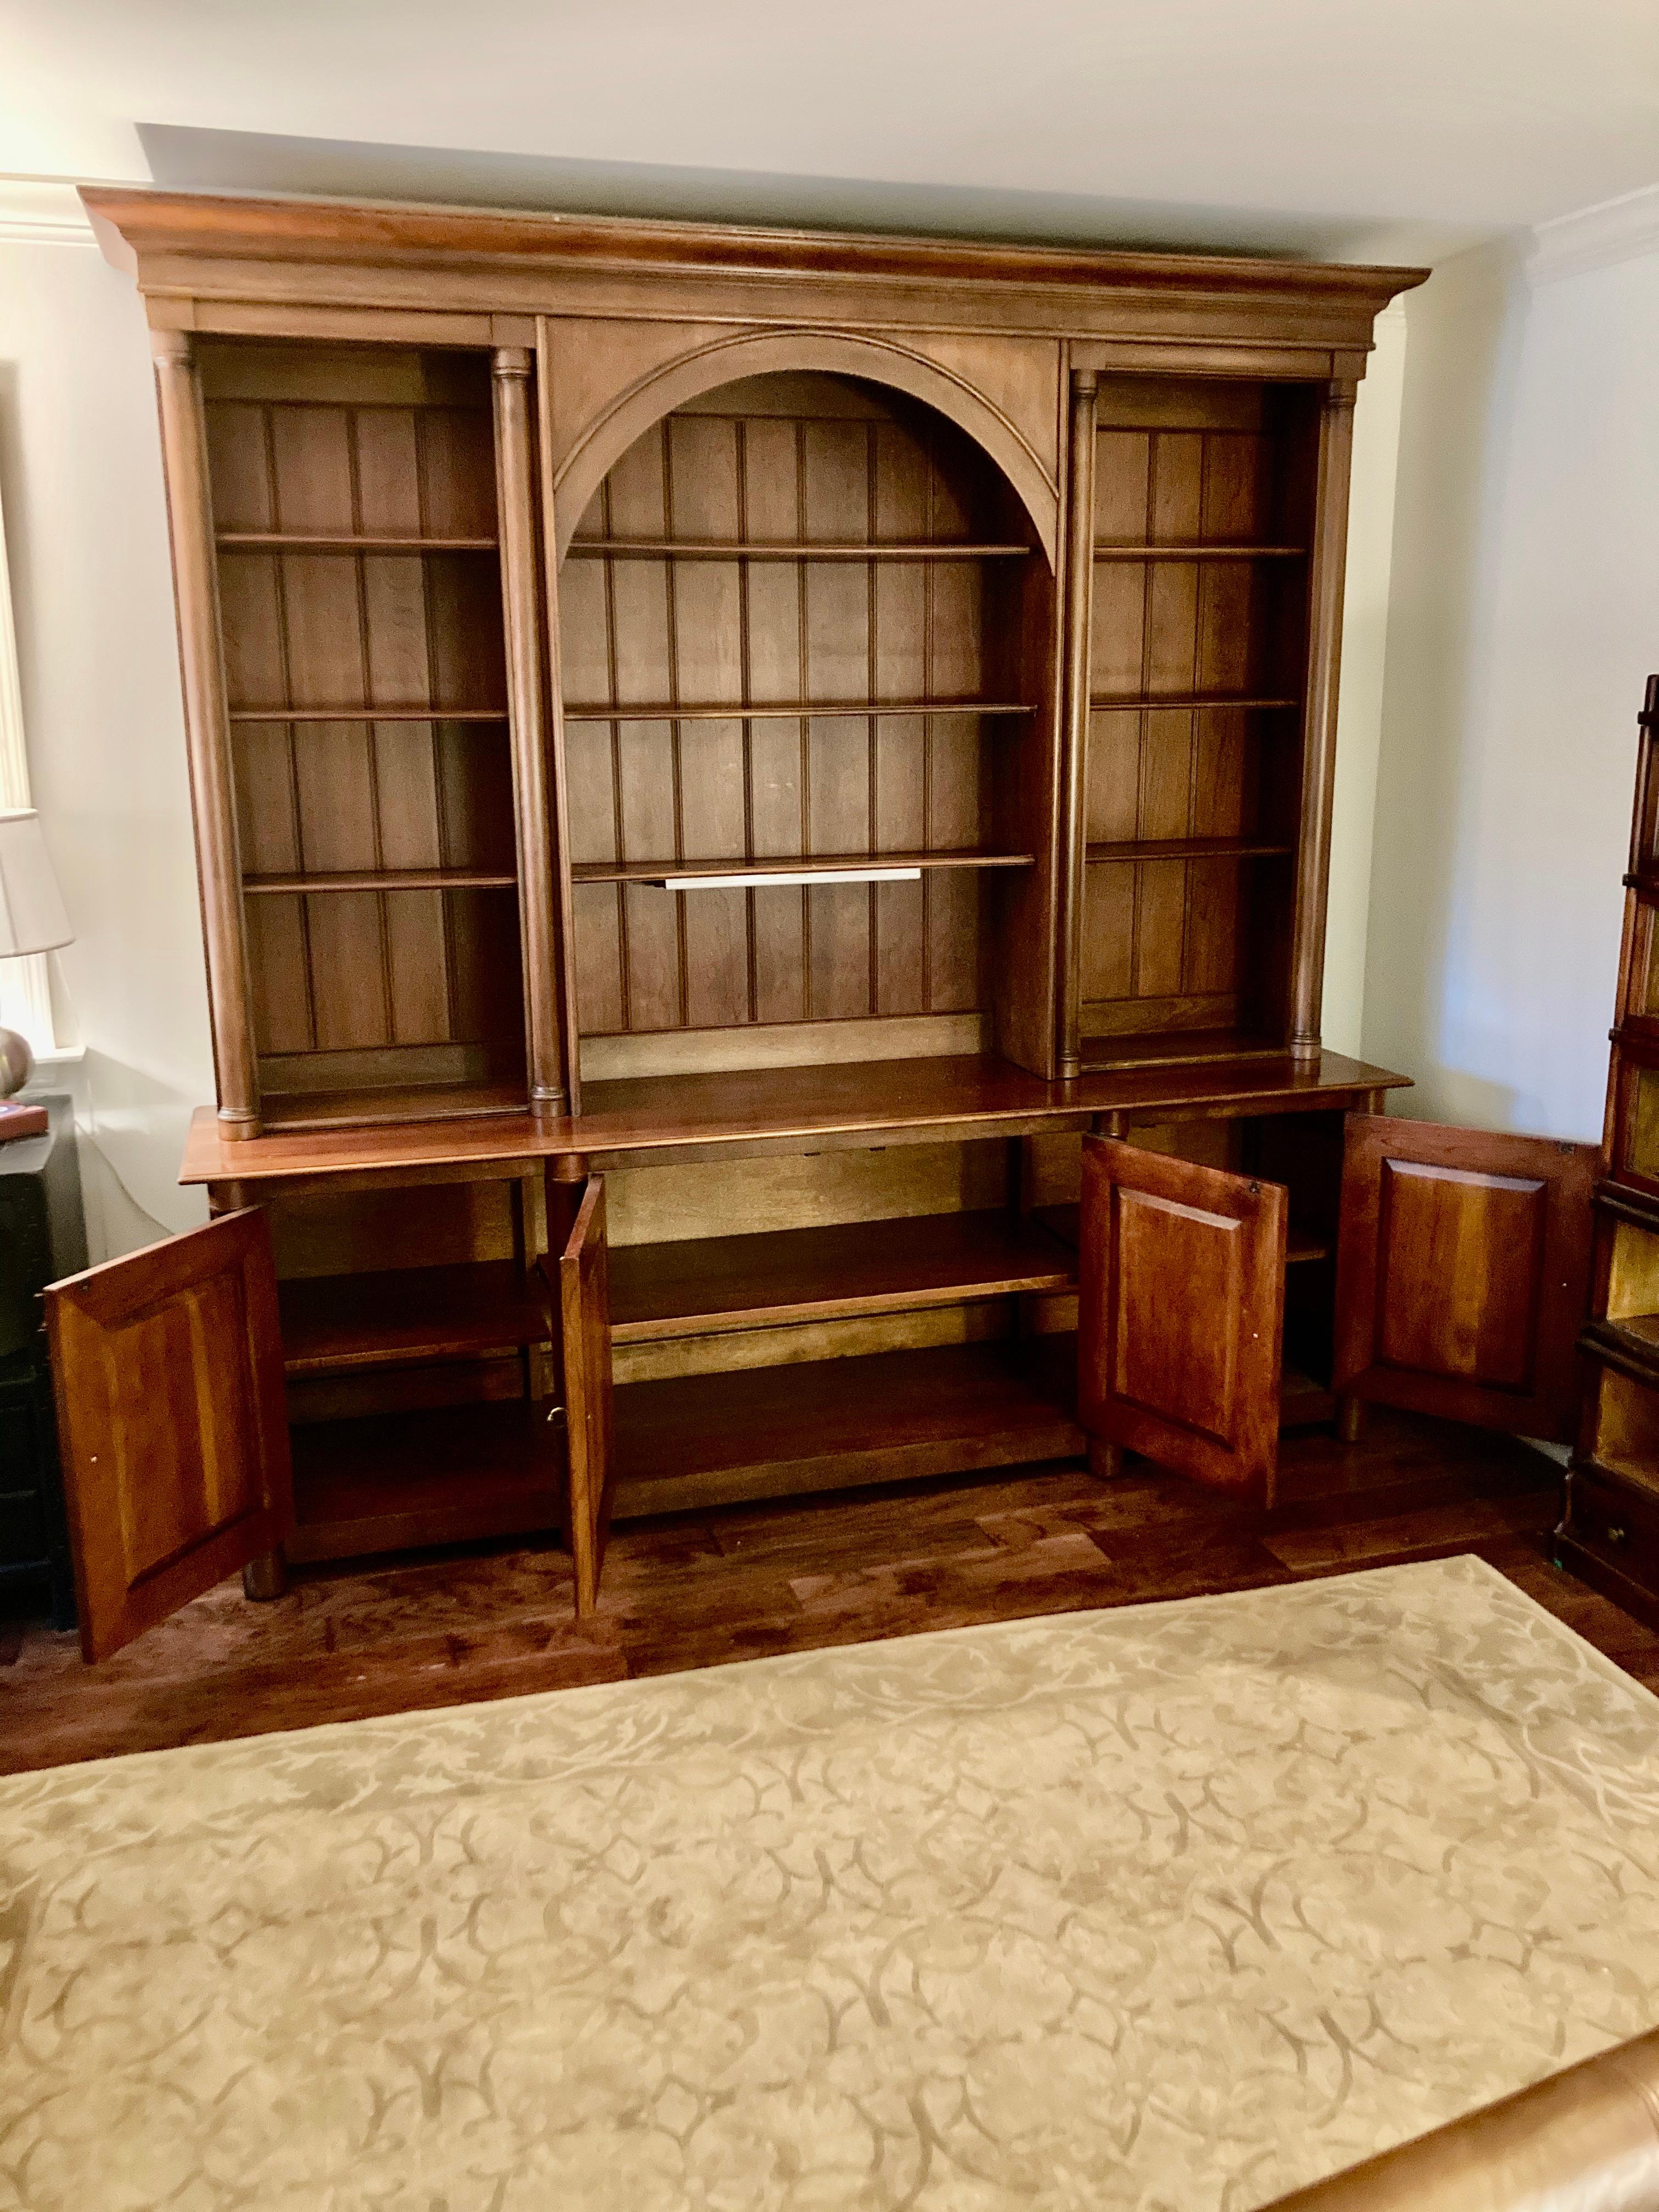 Grand cherry triple bookcase credenza breakfront having bottom credenza with 4 panel doors and tons of storage, top bookcase with adjustable shelves and handsome central arch and crown molding. A recessed light illuminates center section of bookcase